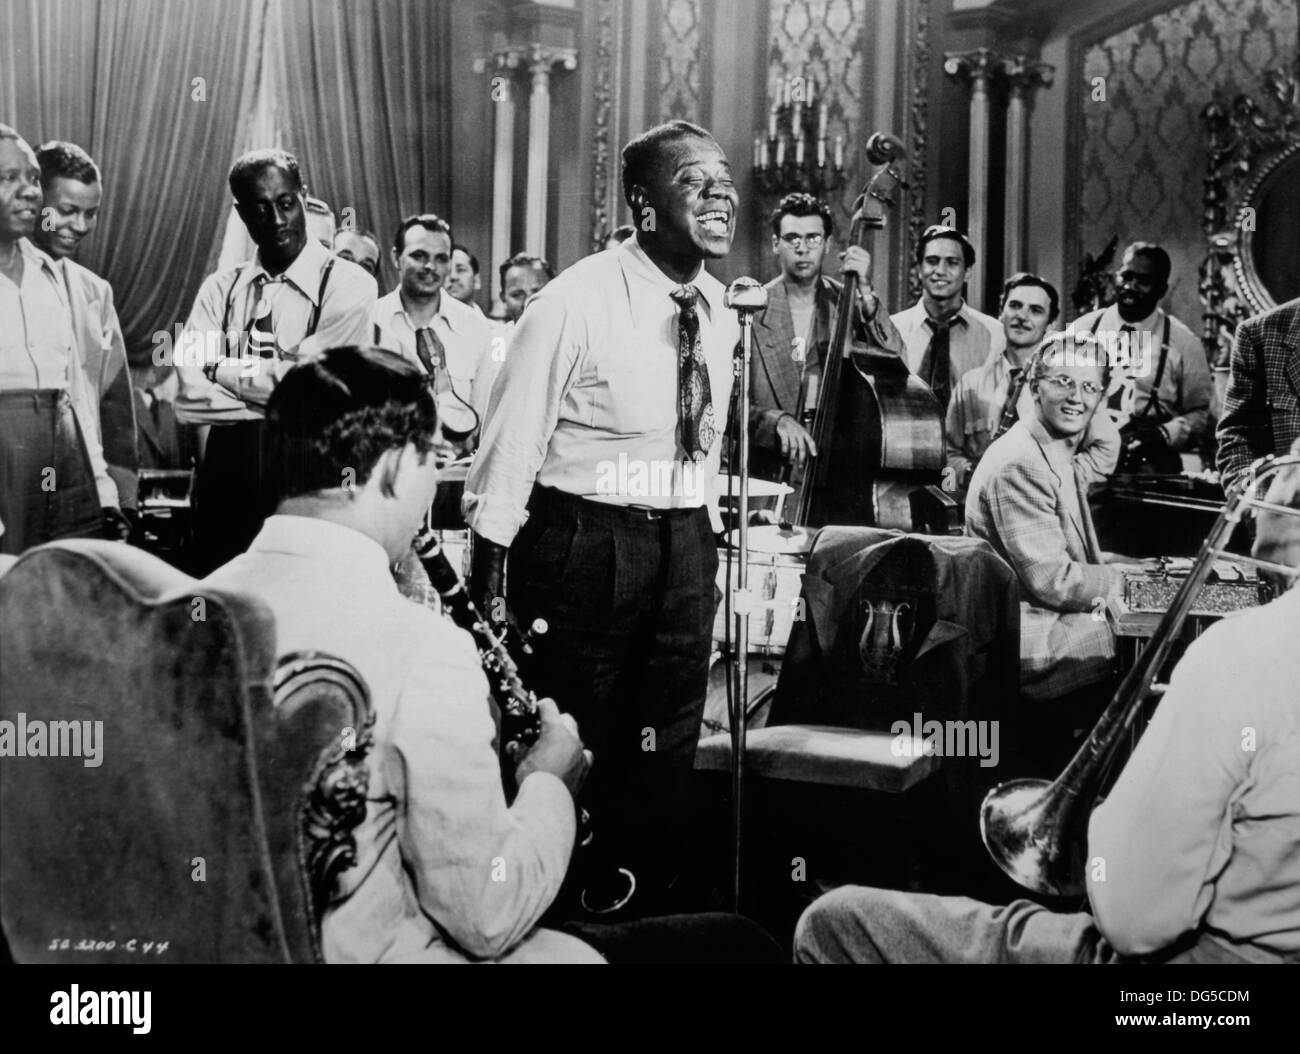 Louis Armstrong and Orchestra, on-set of the Film, "A Song is Born", Samuel  Goldwyn Productions with Distribution via RKO Radio Pictures, 1948 Stock  Photo - Alamy